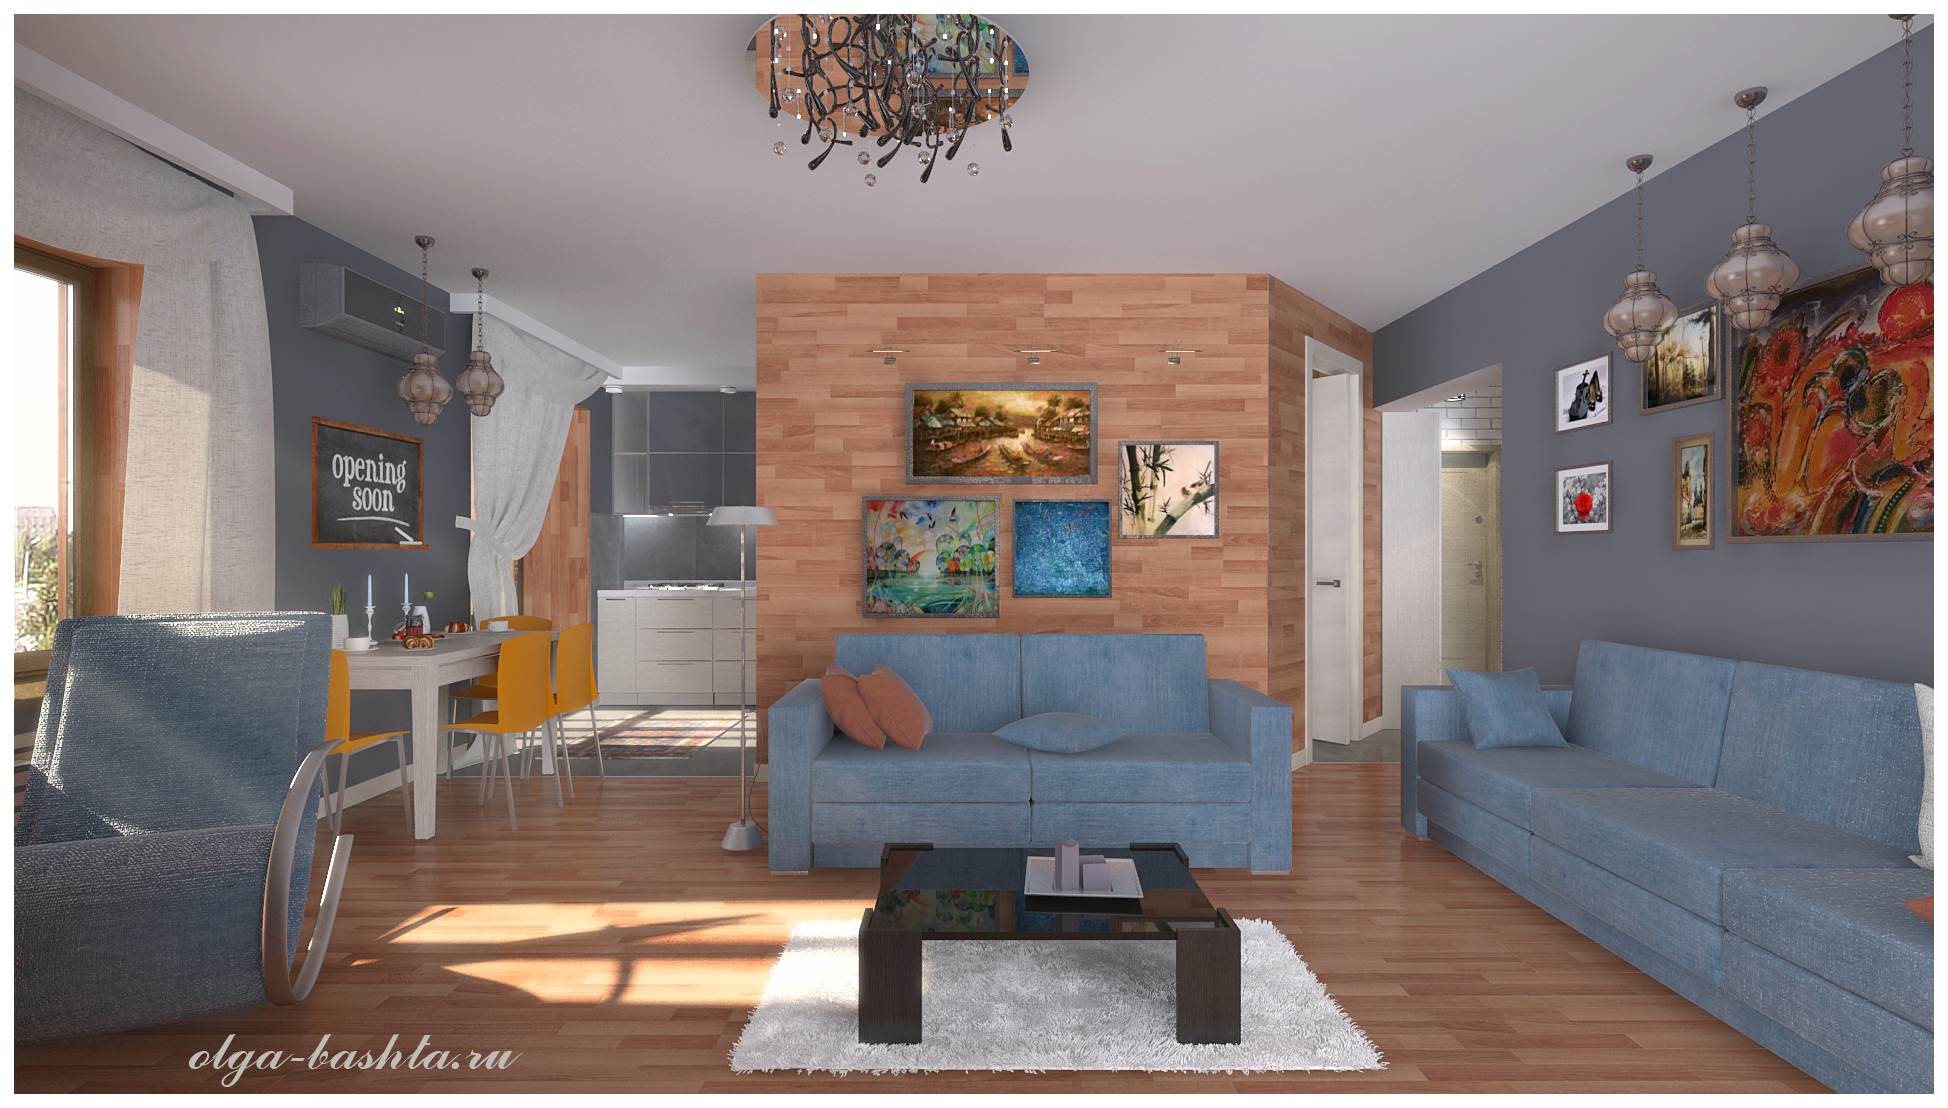 Living room with fireplace in 3d max vray 3.0 image